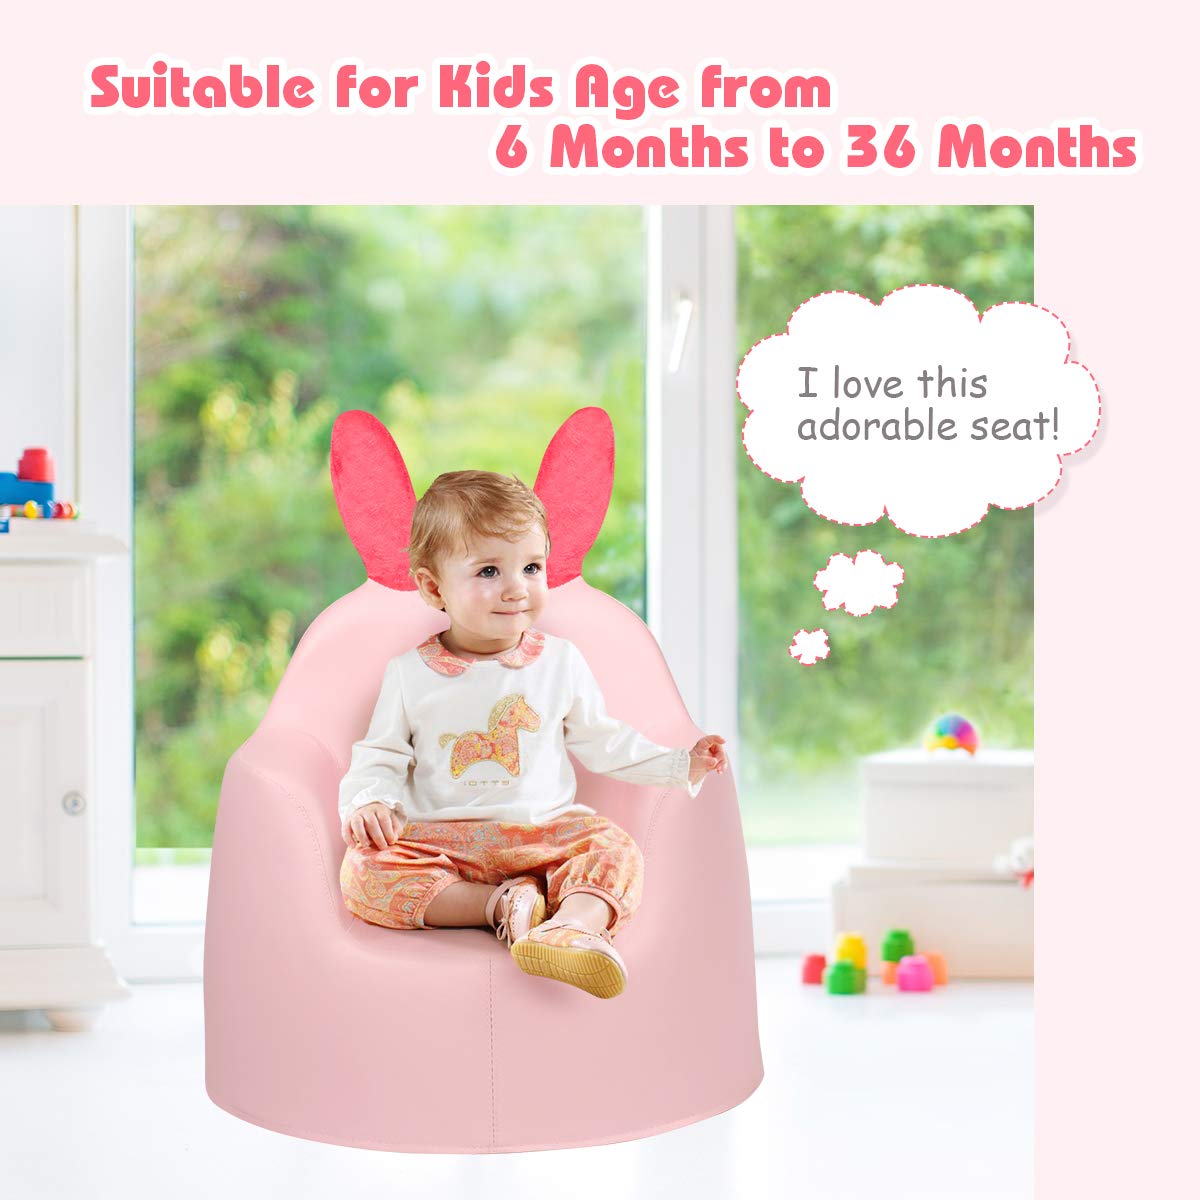 Giantex Children’s Sofa, Cartoon Rabbit Kids Armchair, Upholstered Baby Sofa Seat with Soft PVC Cloth and Stable Sponge, Suitable for Toddlers